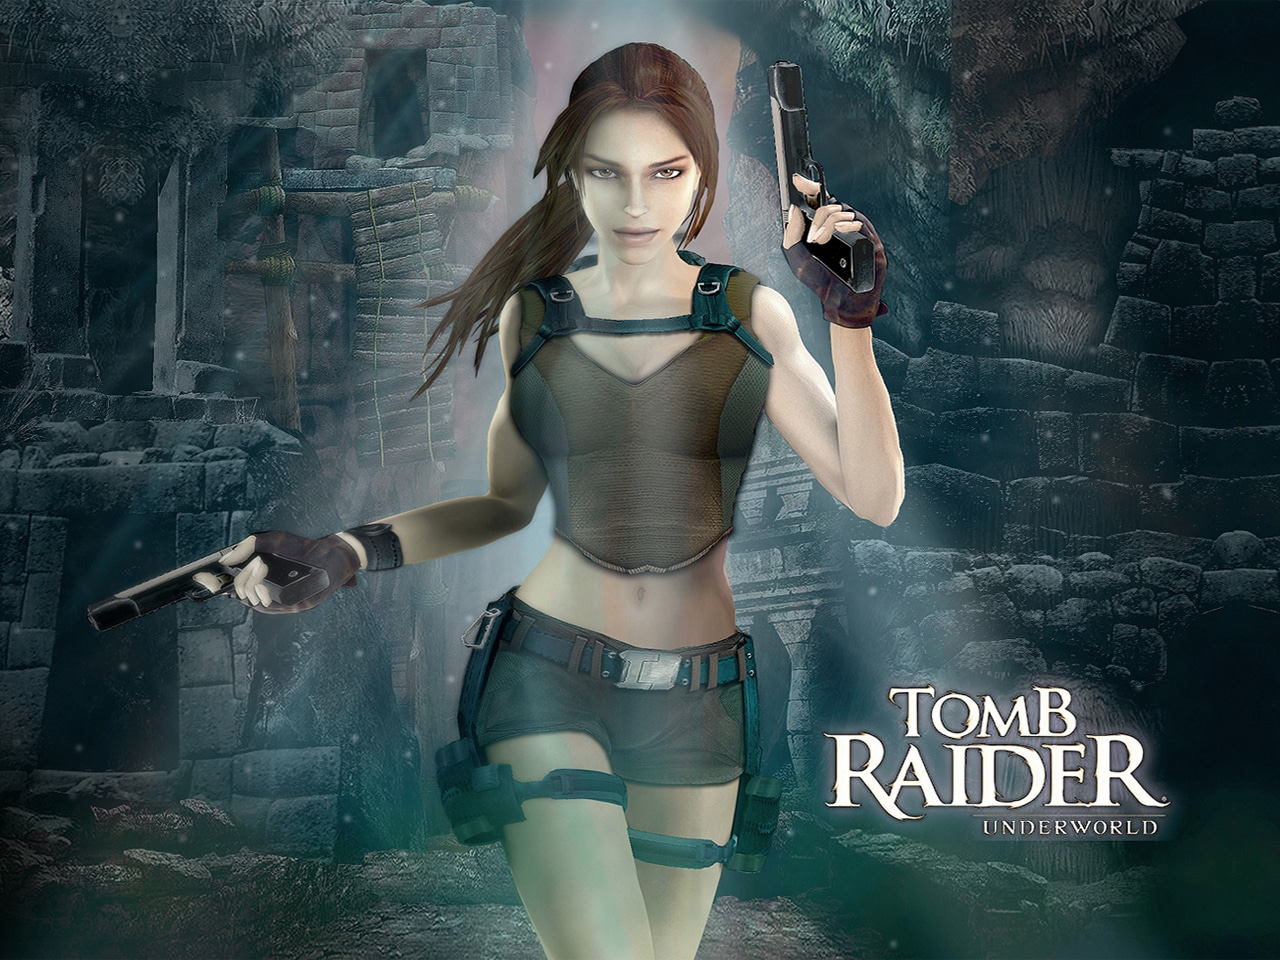 Tomb Raider HD Trilogy revealed for PS3. Features Anniversary, Legend and  Underworld - Video Games Blogger